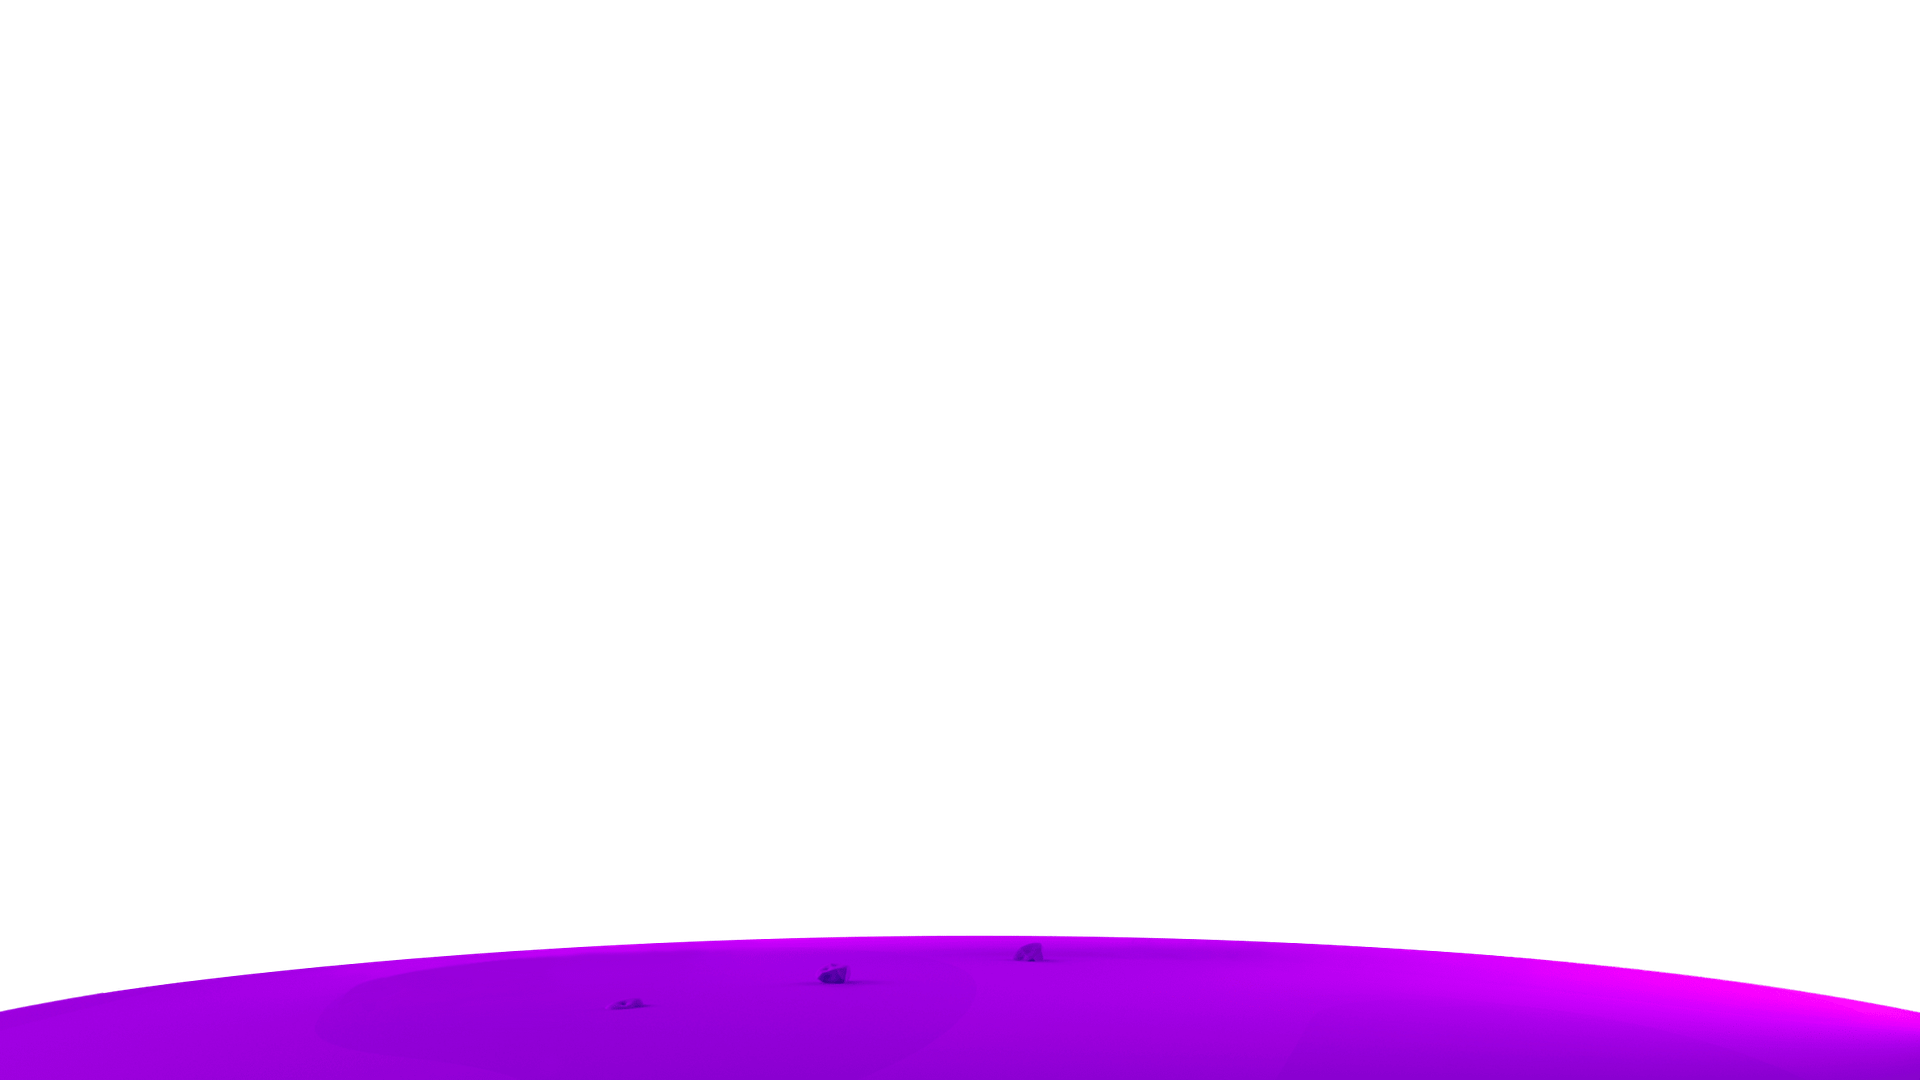 Planet Background